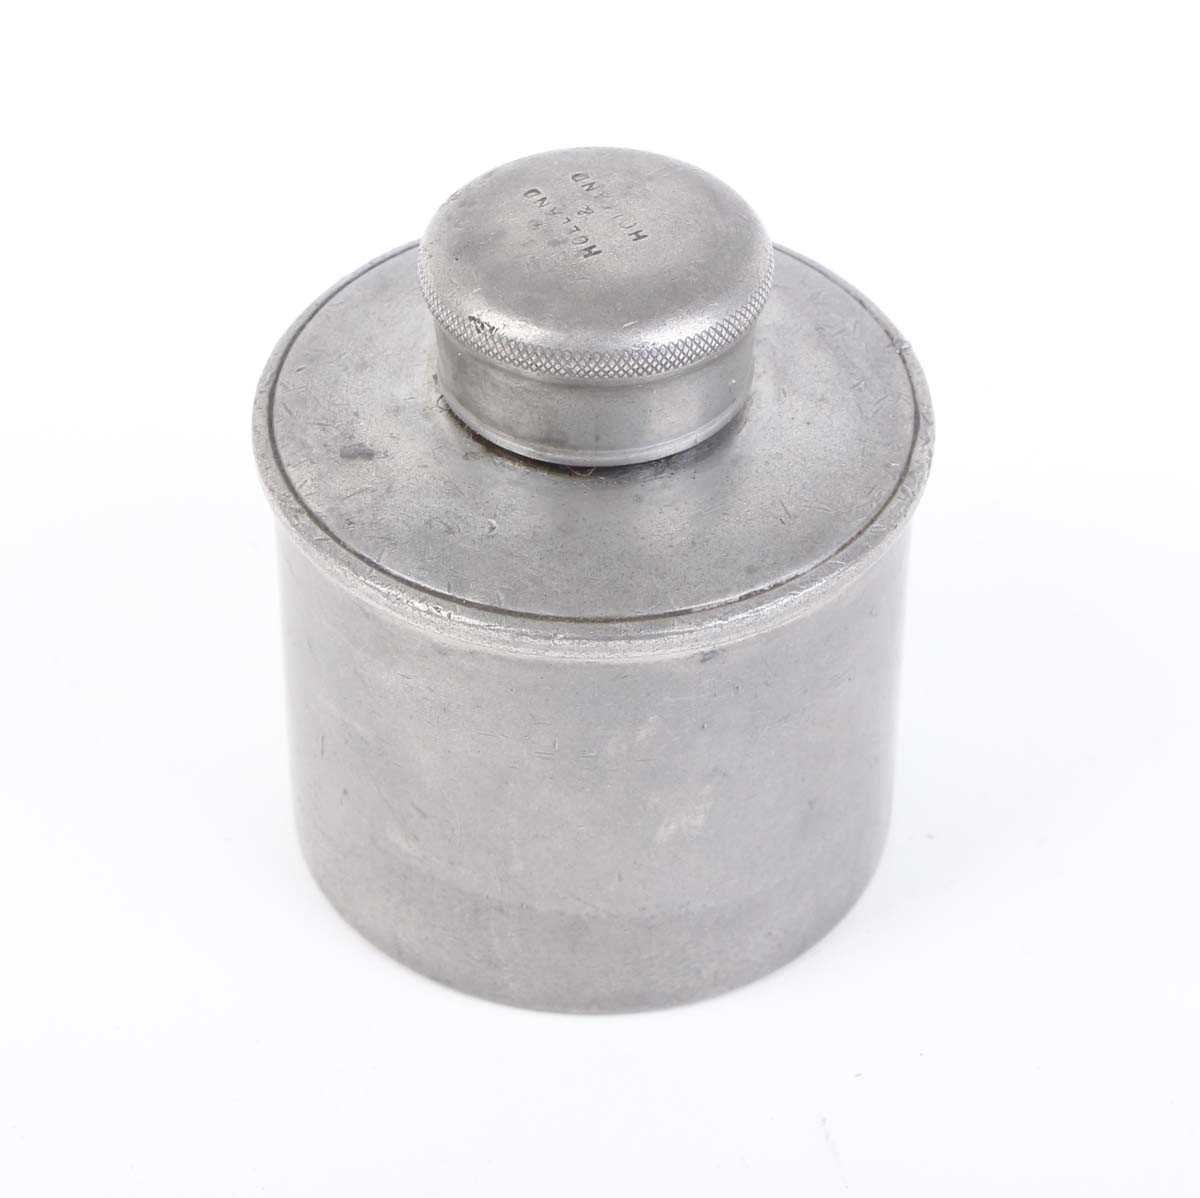 A pewter oil bottle by Holland & Holland